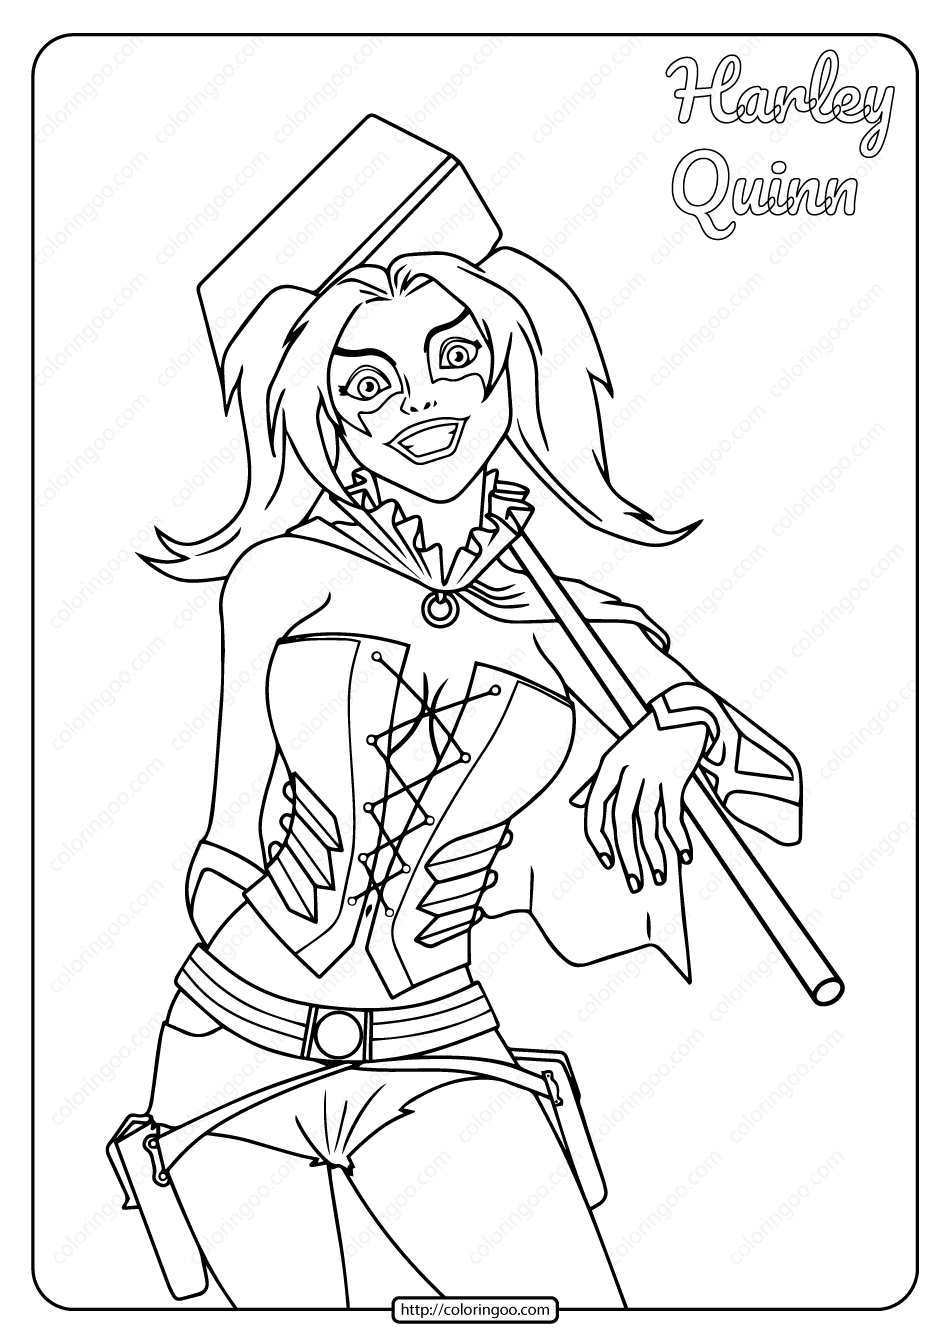 Printable harley quinn pdf coloring page harley quinn drawing coloring pages to print bear coloring pages